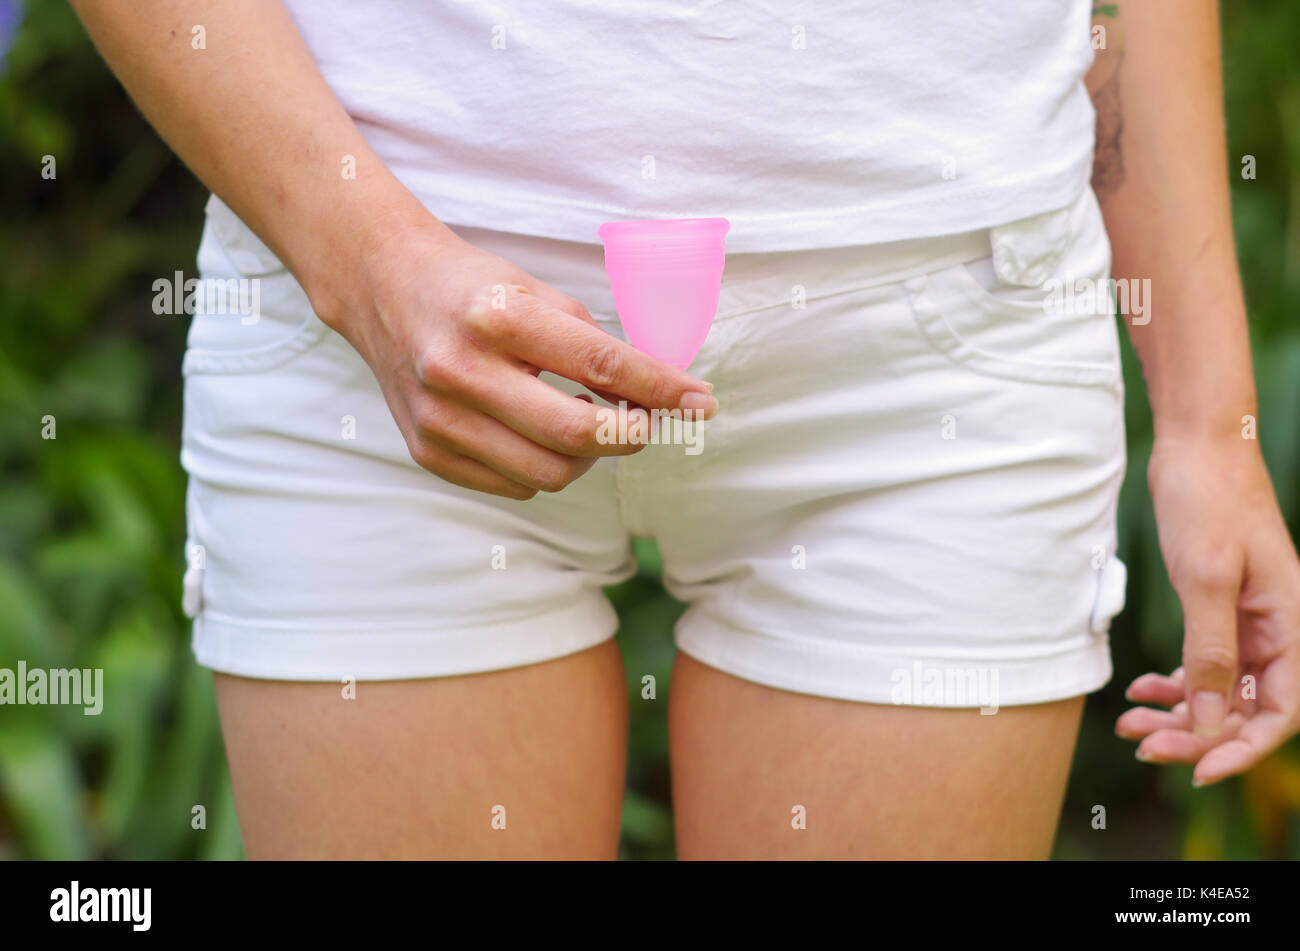 Close up view of young woman holding a menstrual cup in front of her private parts. Gynecology concept Stock Photo